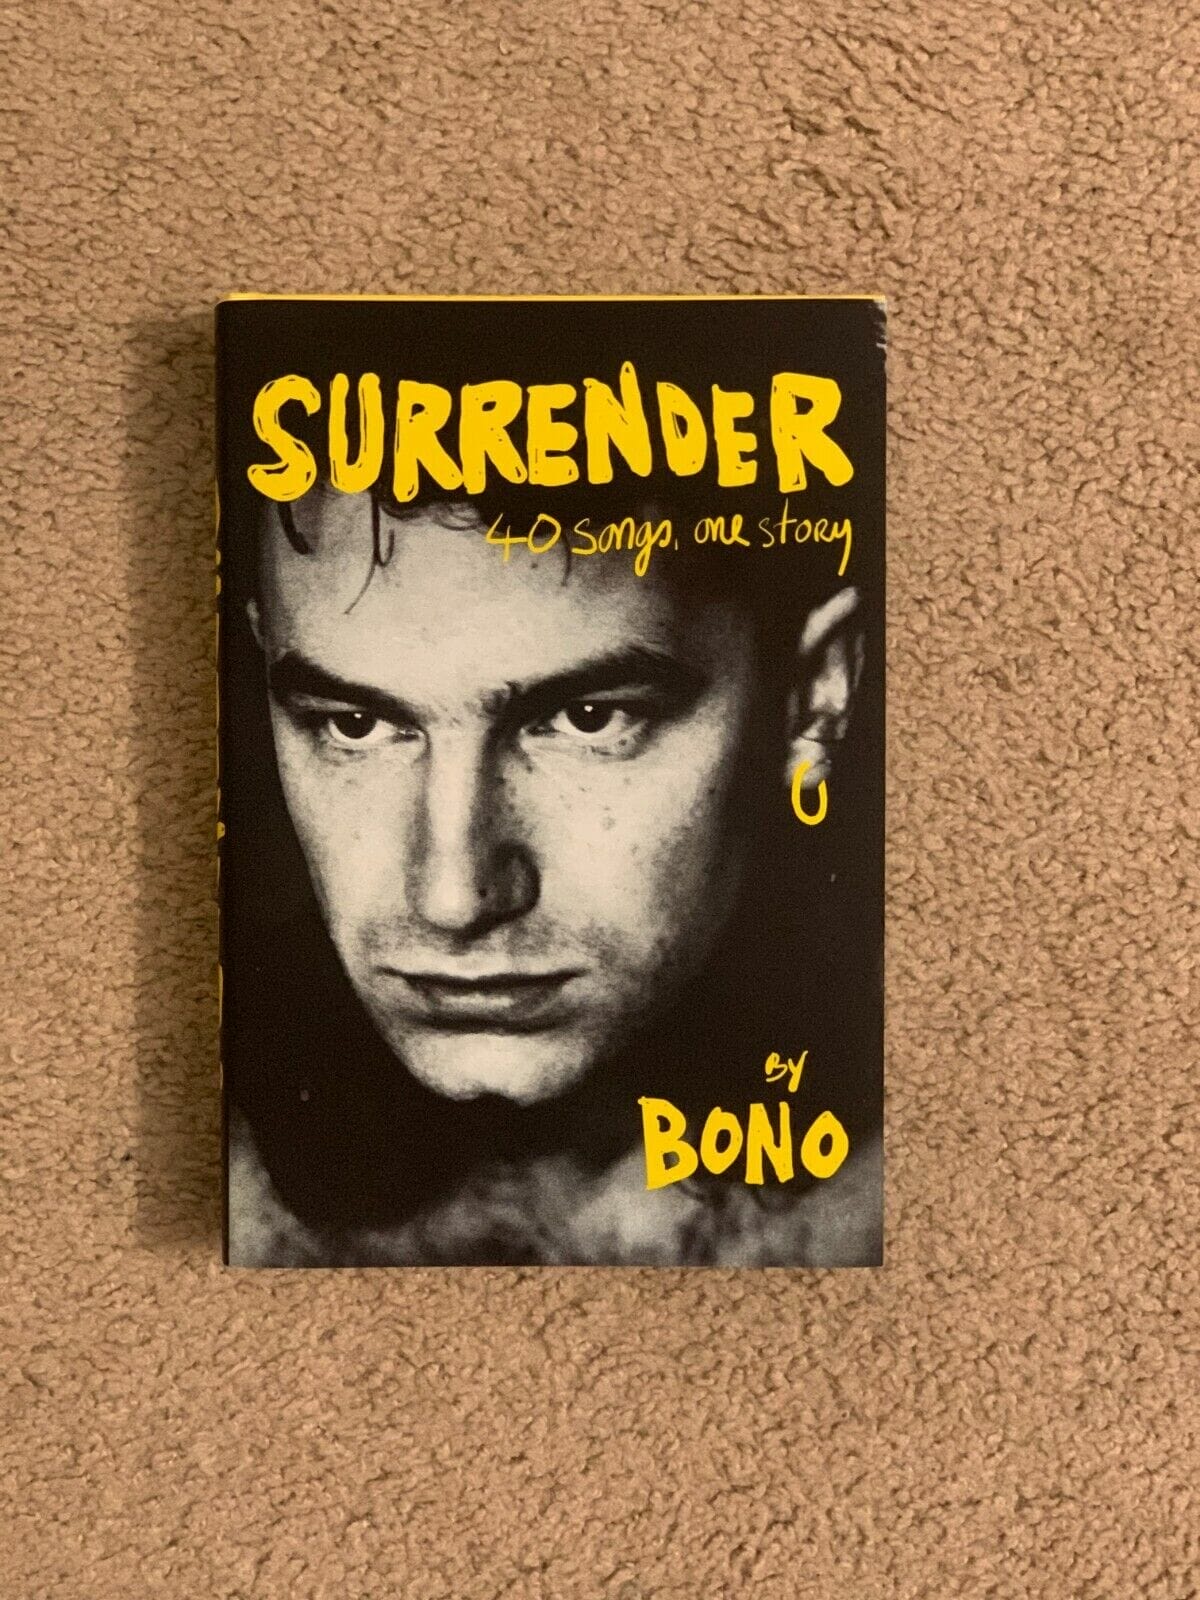 Surrender 40 Songs, One Story by Bono book U2 Autographia